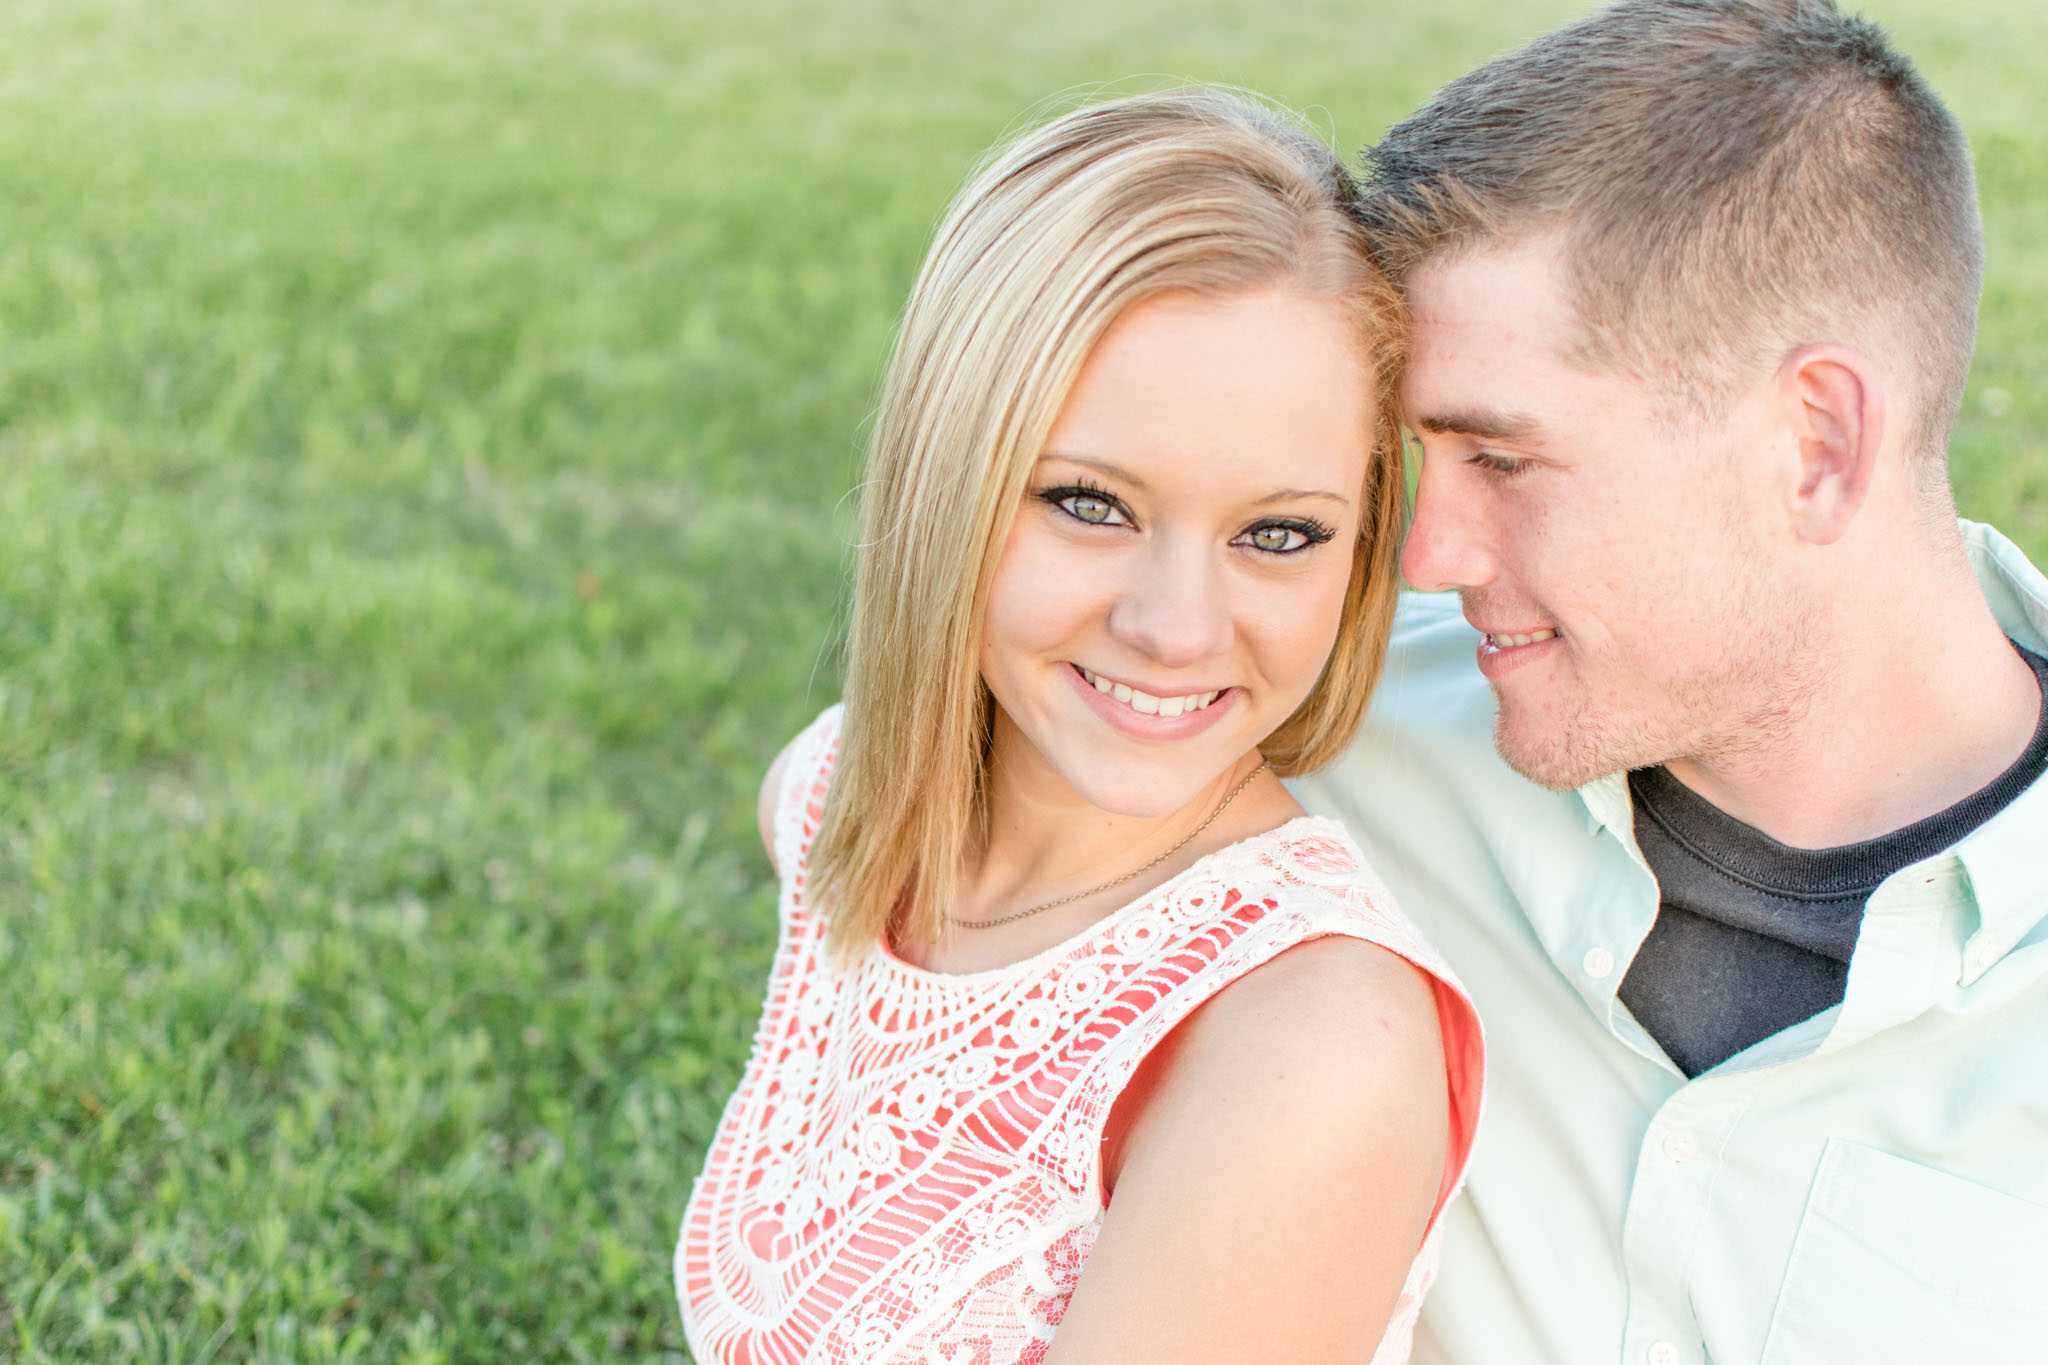 Bride smiles during Indianapolis Engagement Session.